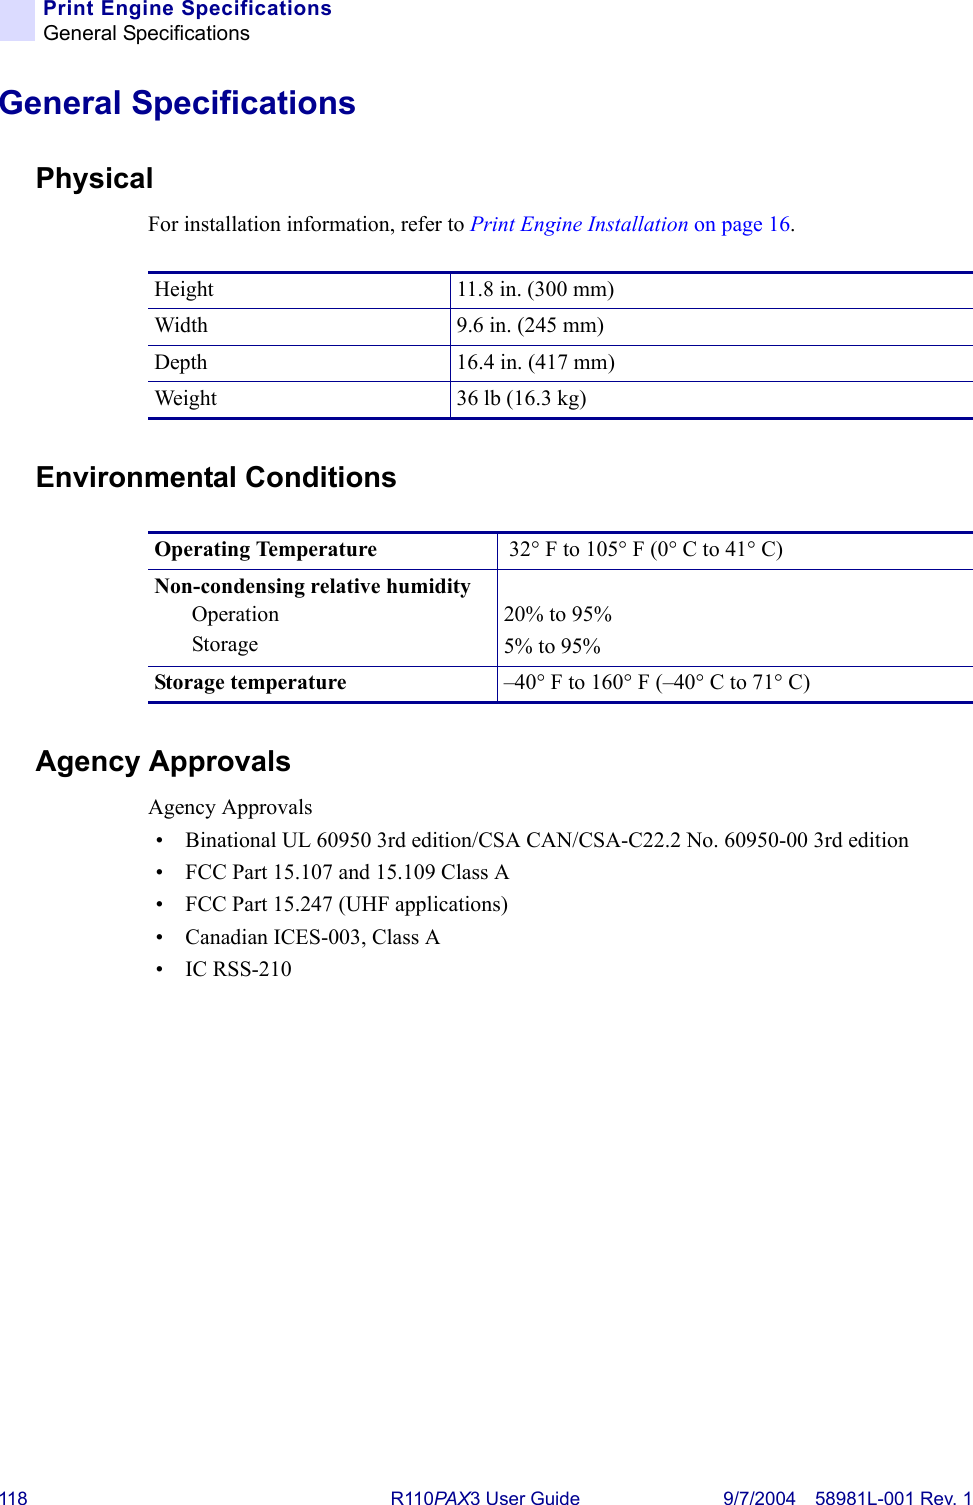 118 R110PAX3 User Guide 9/7/2004 58981L-001 Rev. 1Print Engine SpecificationsGeneral SpecificationsGeneral SpecificationsPhysicalFor installation information, refer to Print Engine Installation on page 16.Environmental ConditionsAgency ApprovalsAgency Approvals• Binational UL 60950 3rd edition/CSA CAN/CSA-C22.2 No. 60950-00 3rd edition• FCC Part 15.107 and 15.109 Class A• FCC Part 15.247 (UHF applications)• Canadian ICES-003, Class A•IC RSS-210Height 11.8 in. (300 mm)Width 9.6 in. (245 mm)Depth 16.4 in. (417 mm)Weight 36 lb (16.3 kg)Operating Temperature  32° F to 105° F (0° C to 41° C)Non-condensing relative humidityOperationStorage20% to 95%5% to 95%Storage temperature –40° F to 160° F (–40° C to 71° C)